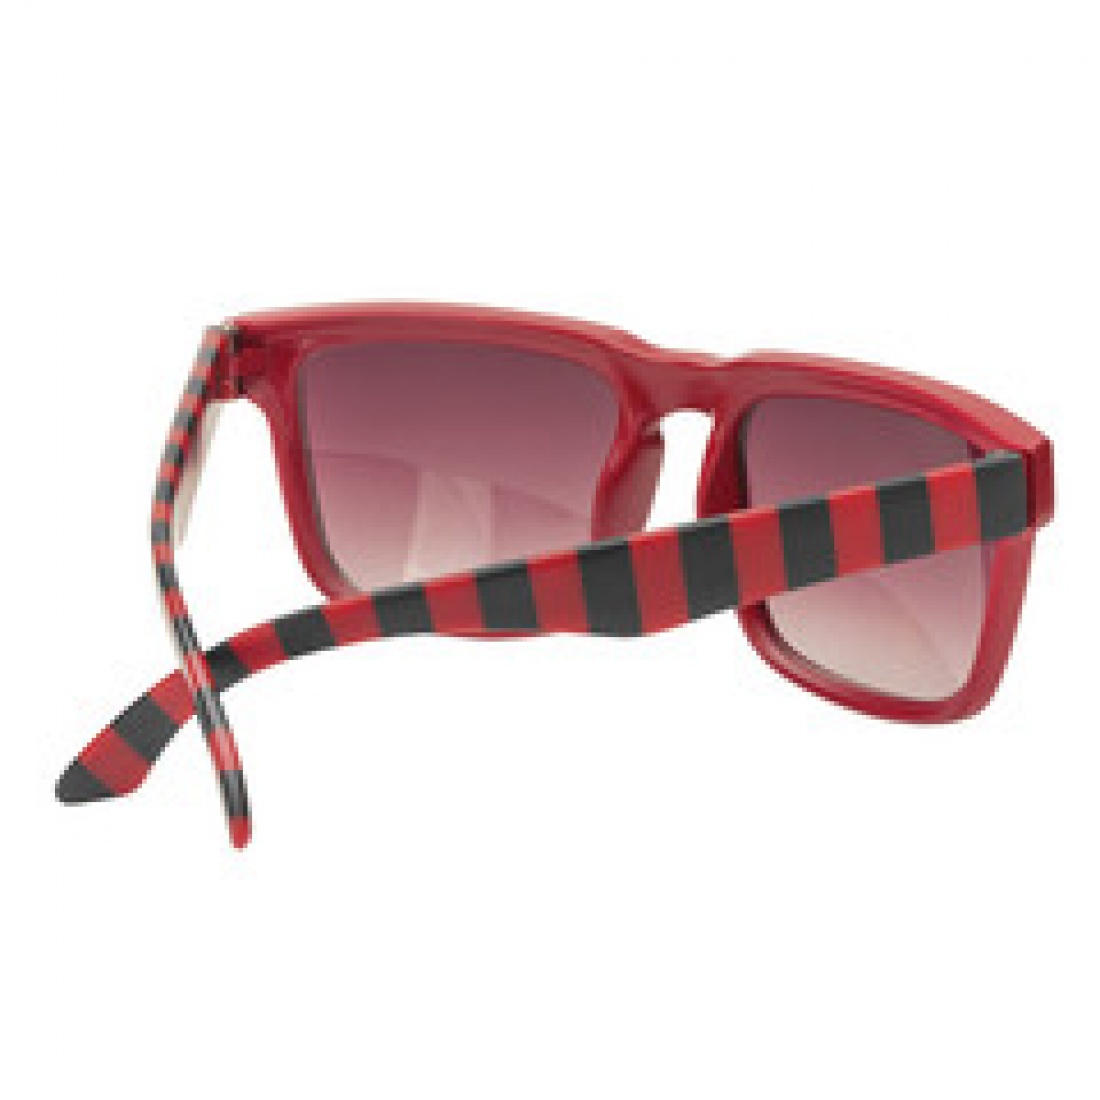 IND-Pattern Square Sunglasses Red/Black Stripes OS Unisex 